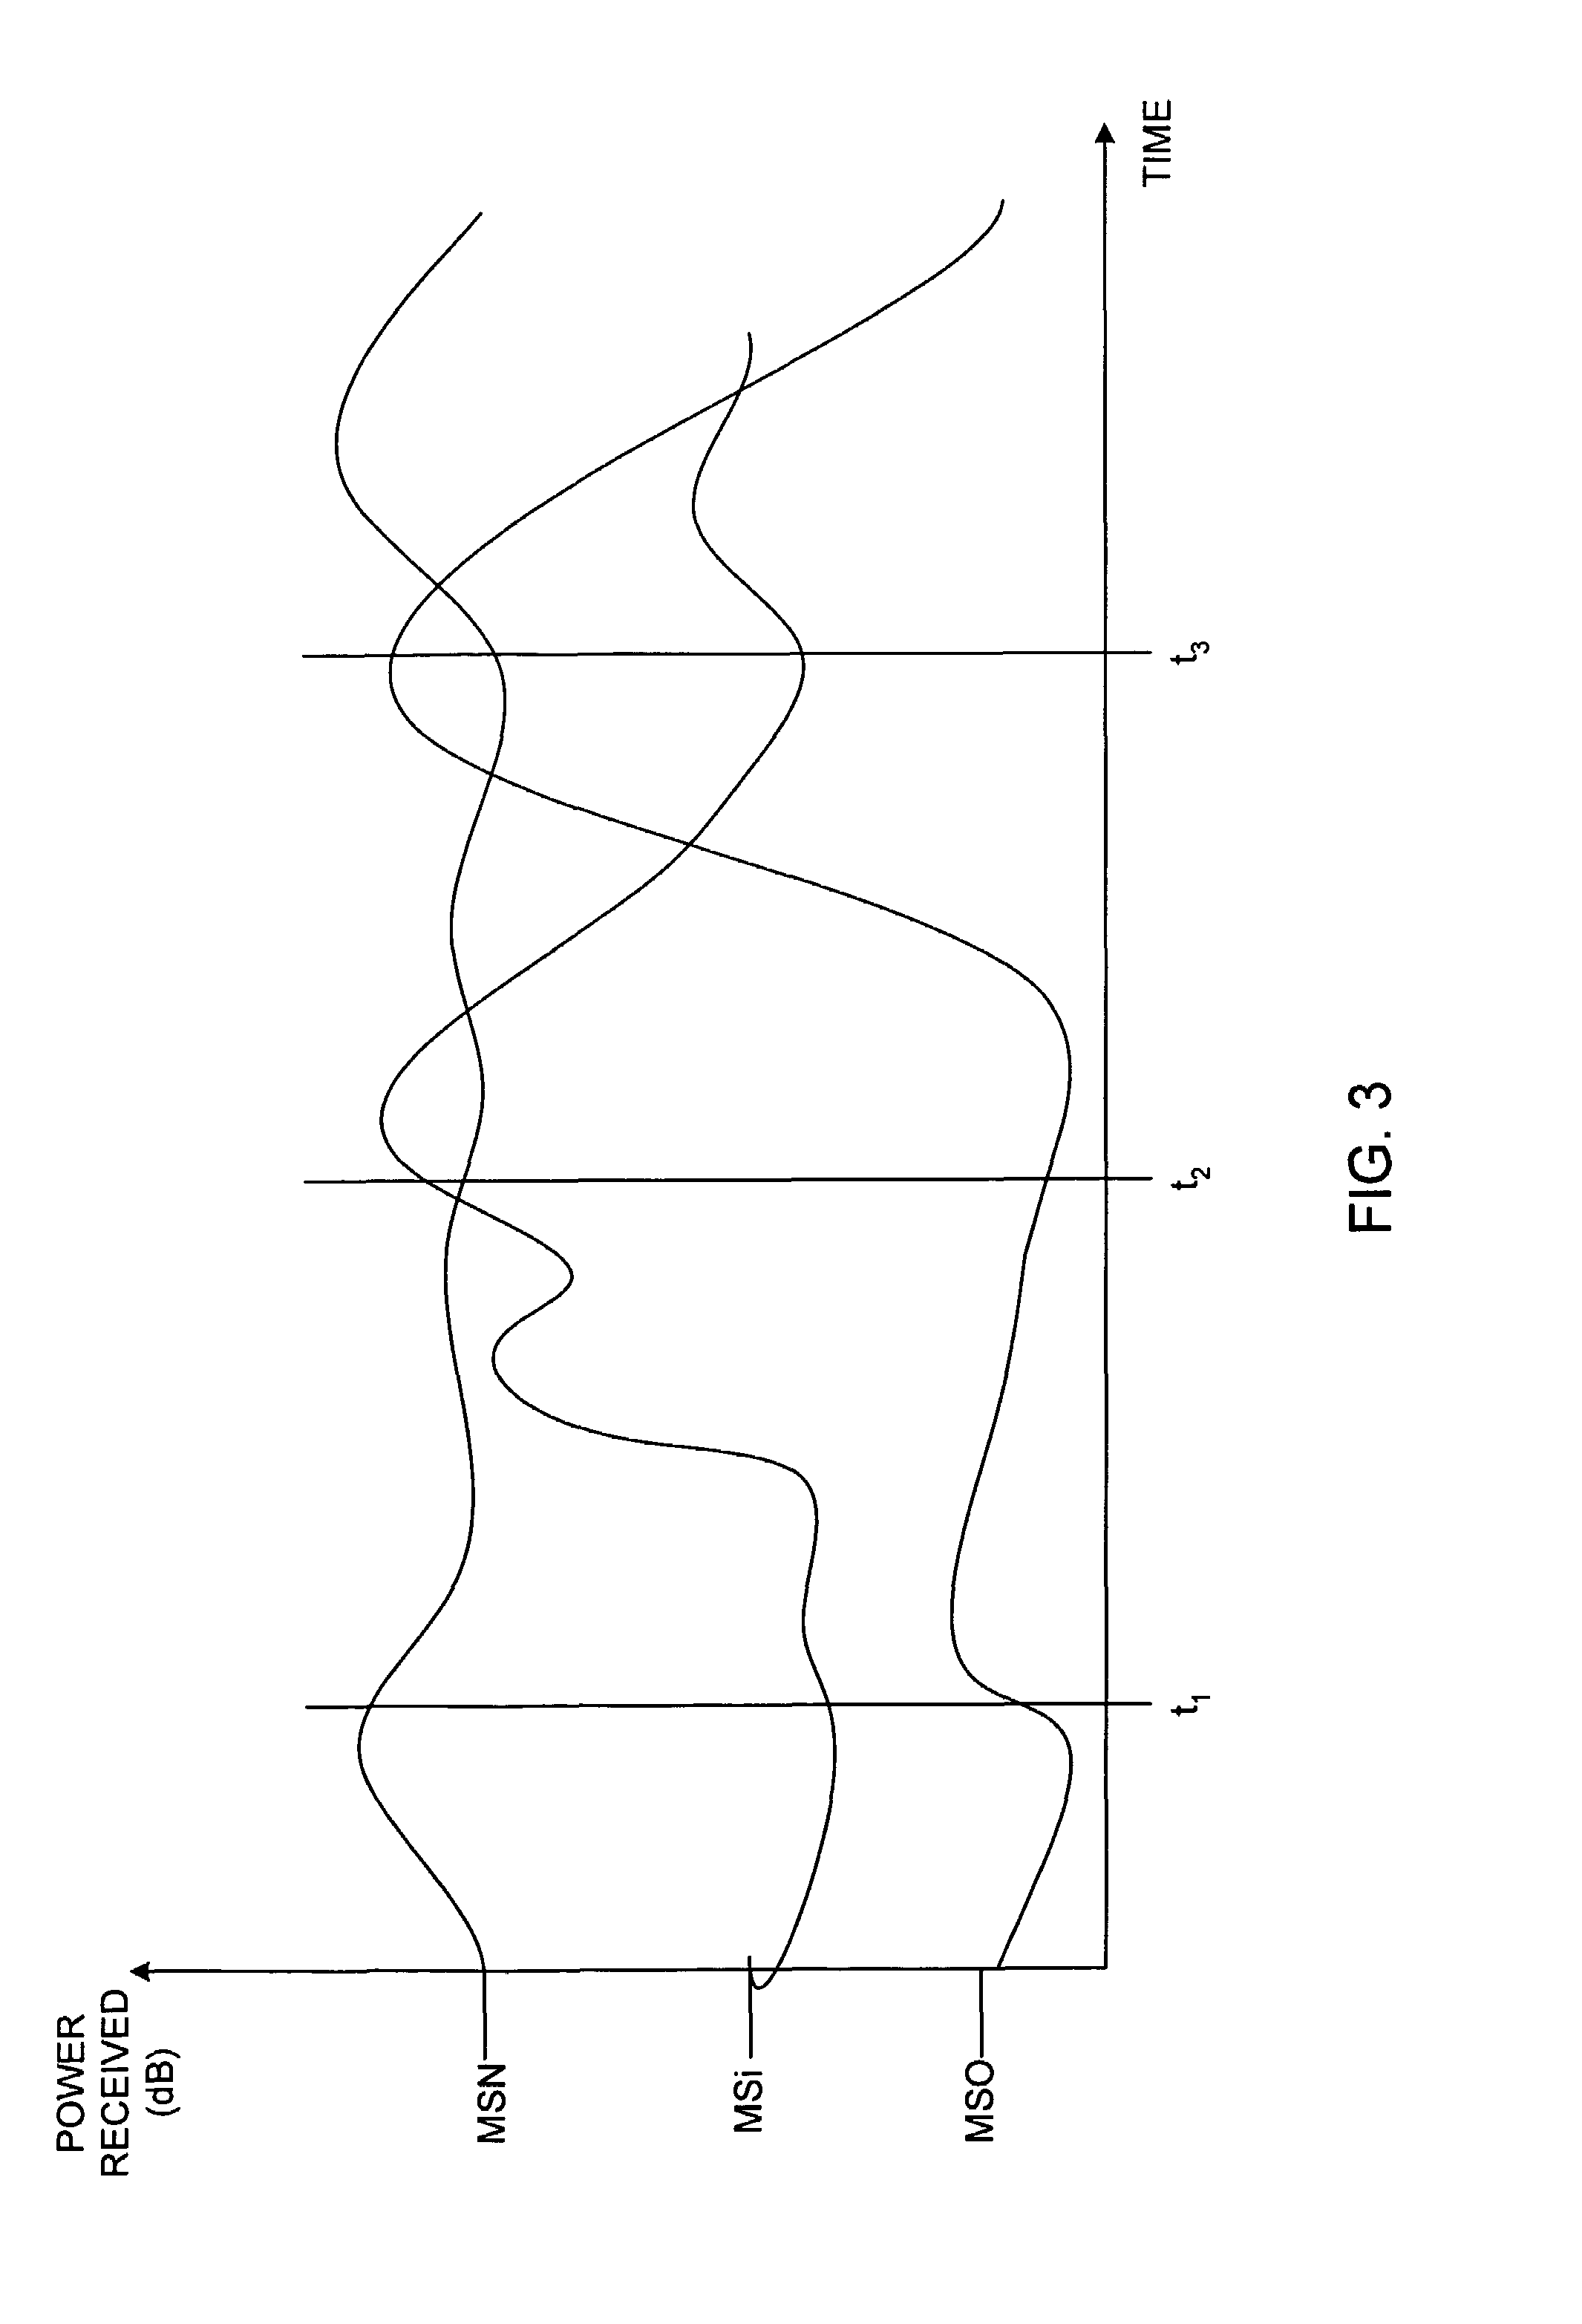 Method and apparatus for determining a data rate in a high rate packet data wireless communications system